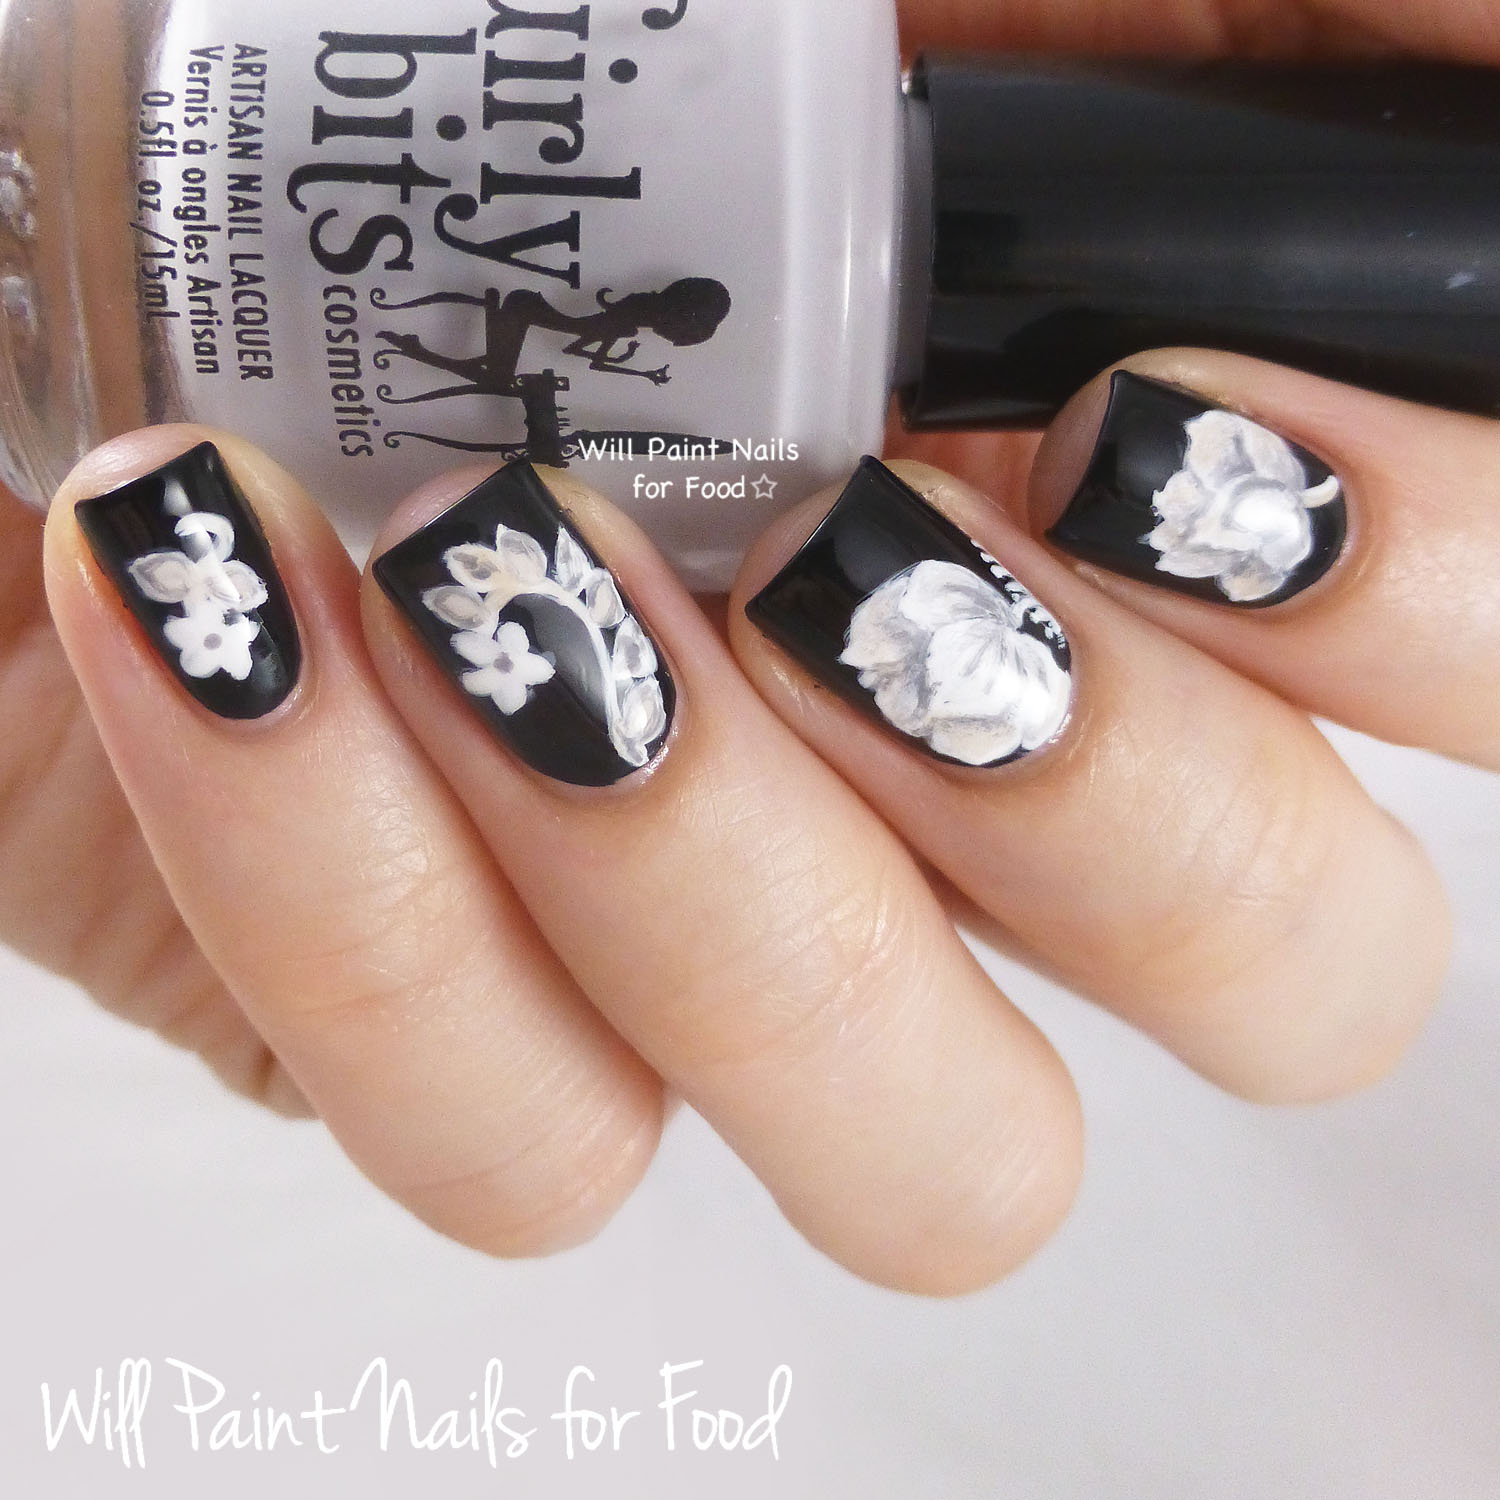 Will Paint Nails for Food: Salvatore Ferragamo-Inspired Flowers